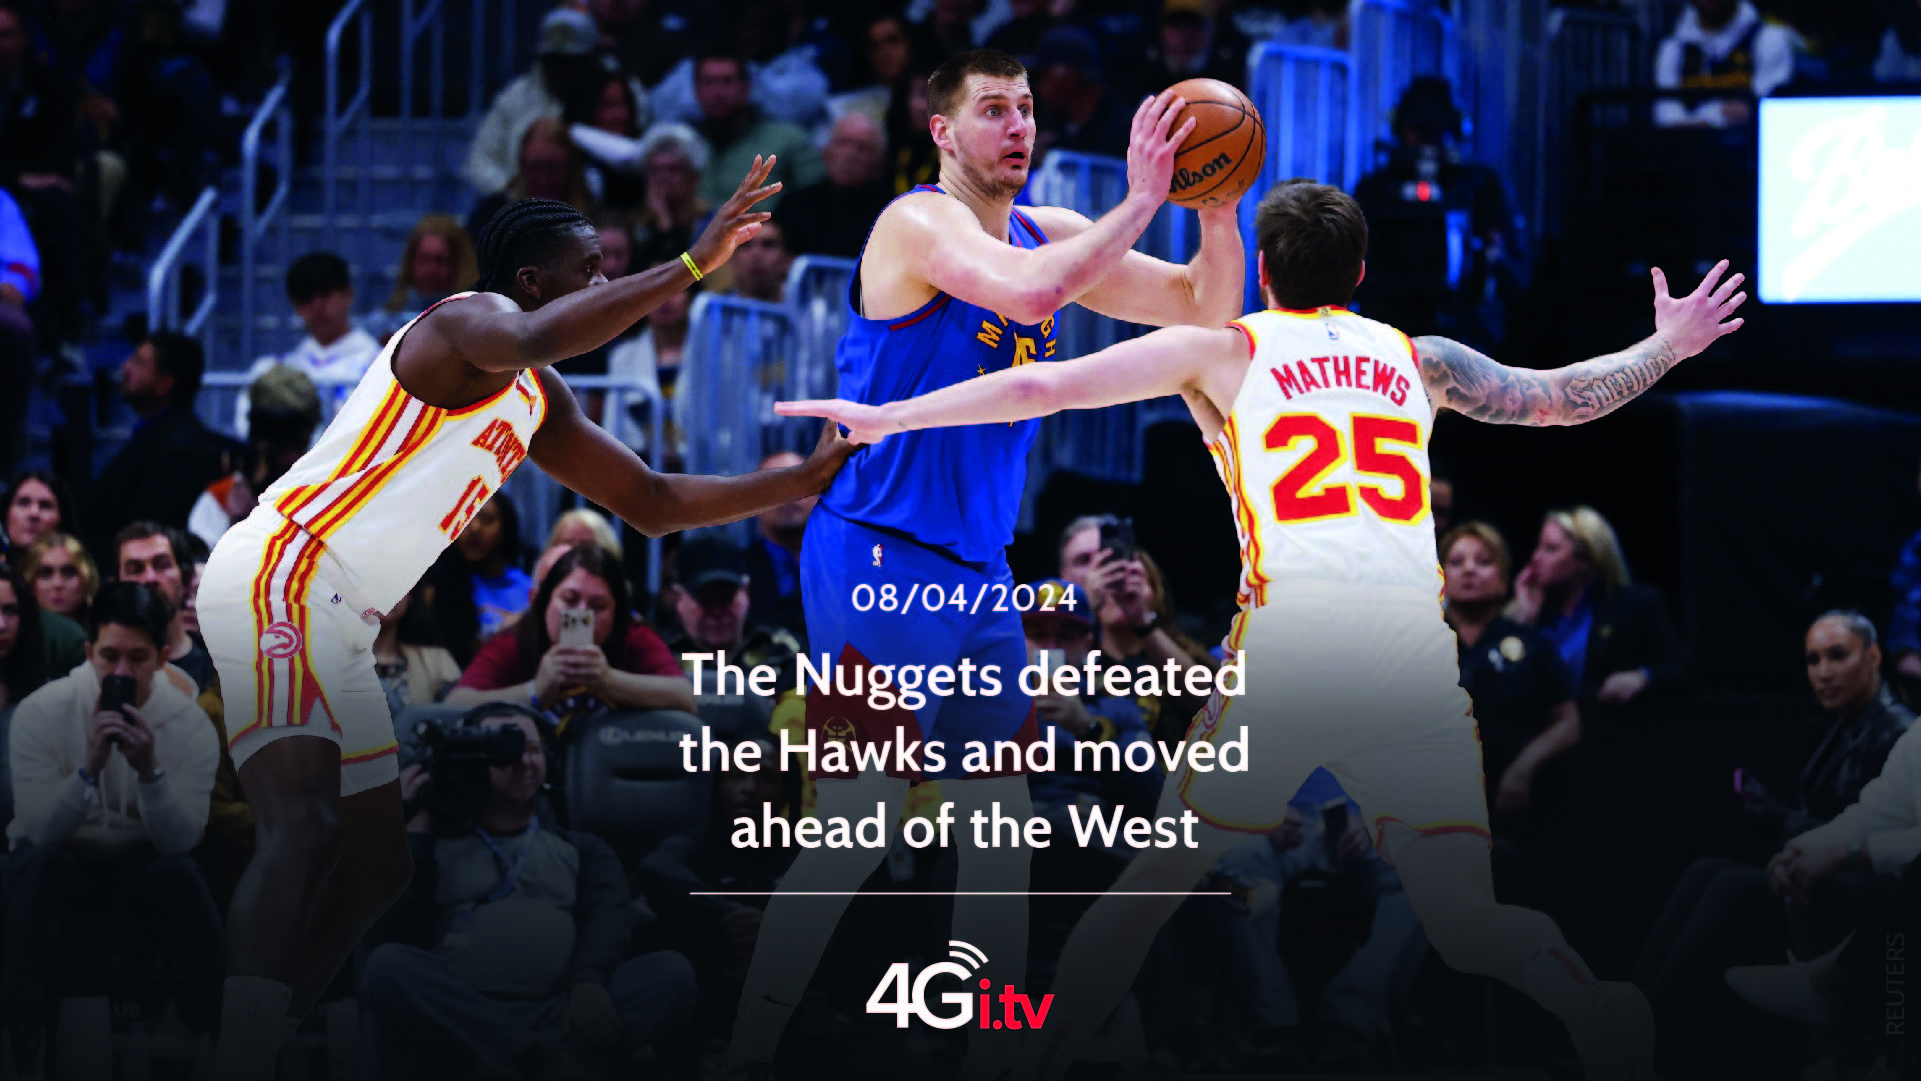 Lesen Sie mehr über den Artikel The Nuggets defeated the Hawks and moved ahead of the West